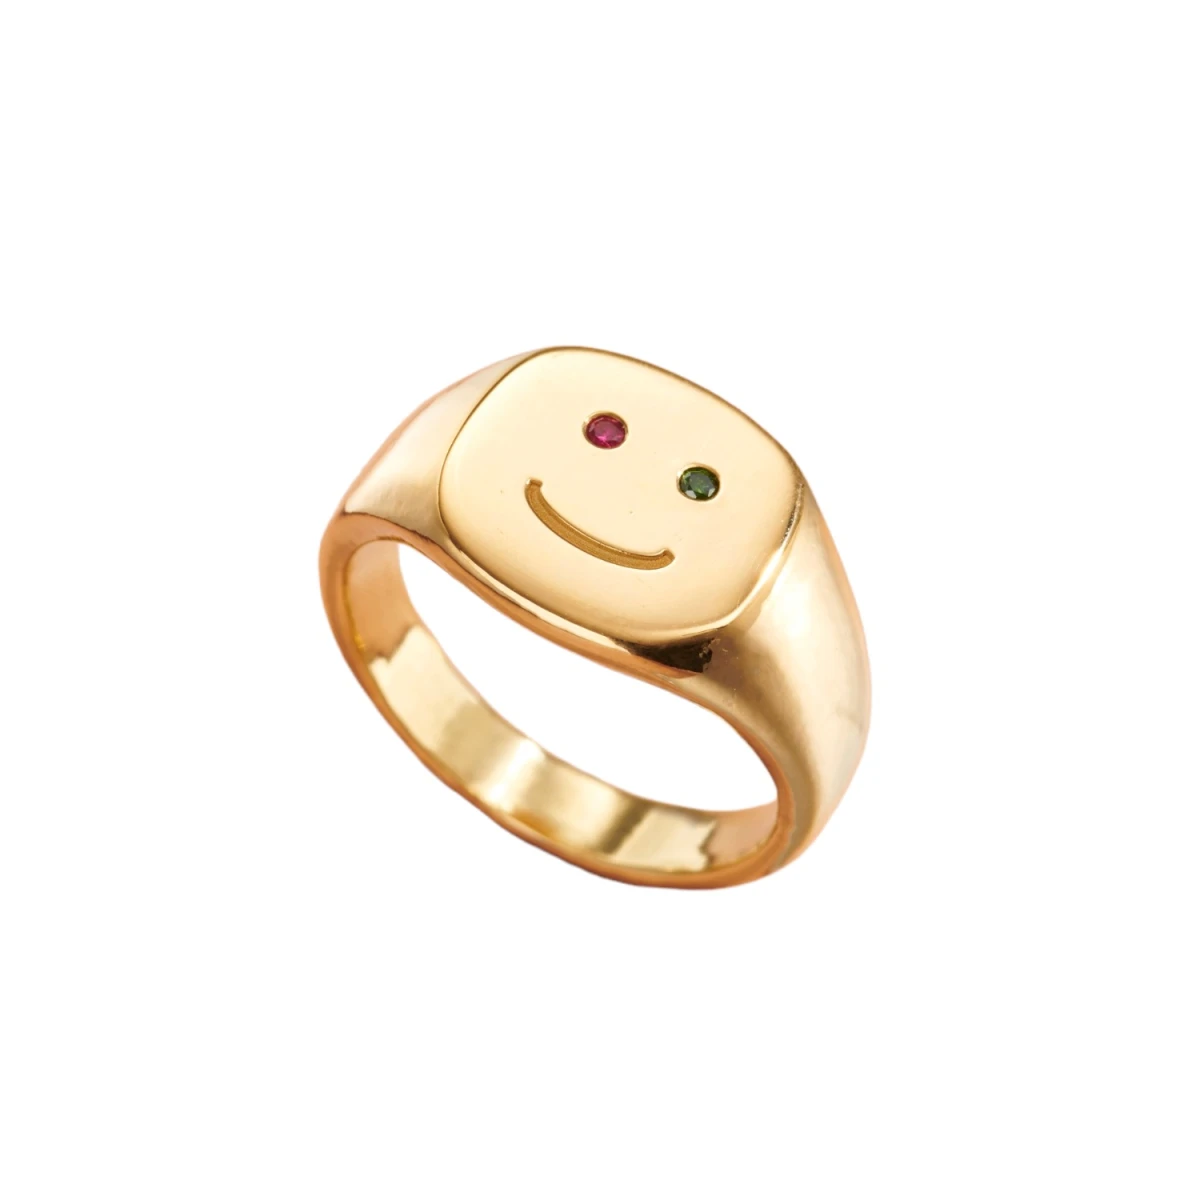 posh-totty-designs-gold-plated-emerald-and-ruby-smiley-face-signet-ring